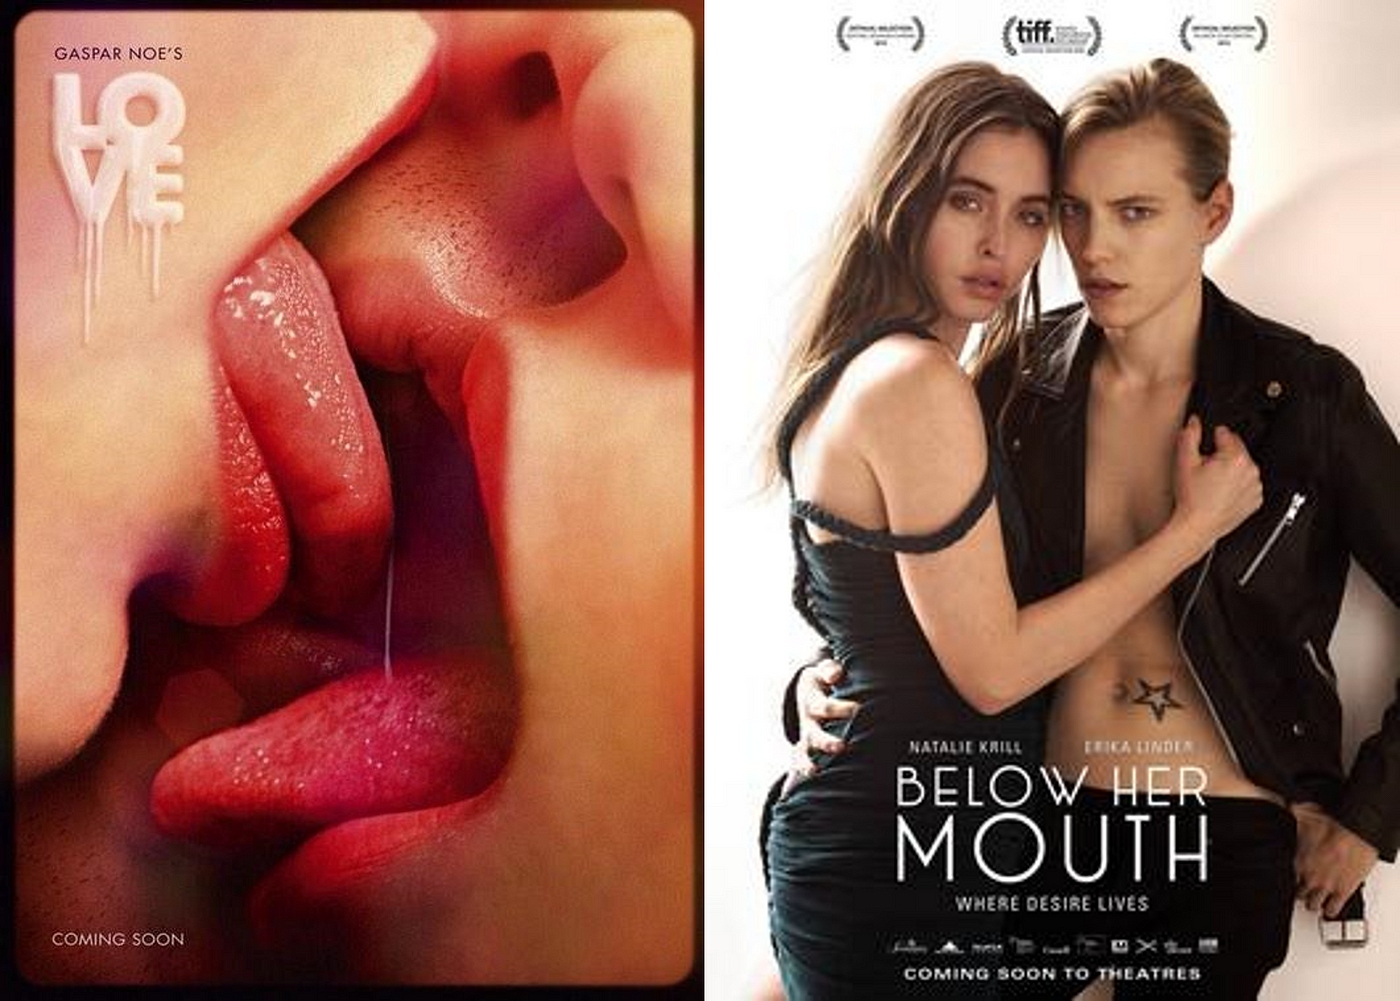 Most explicit sexual movies